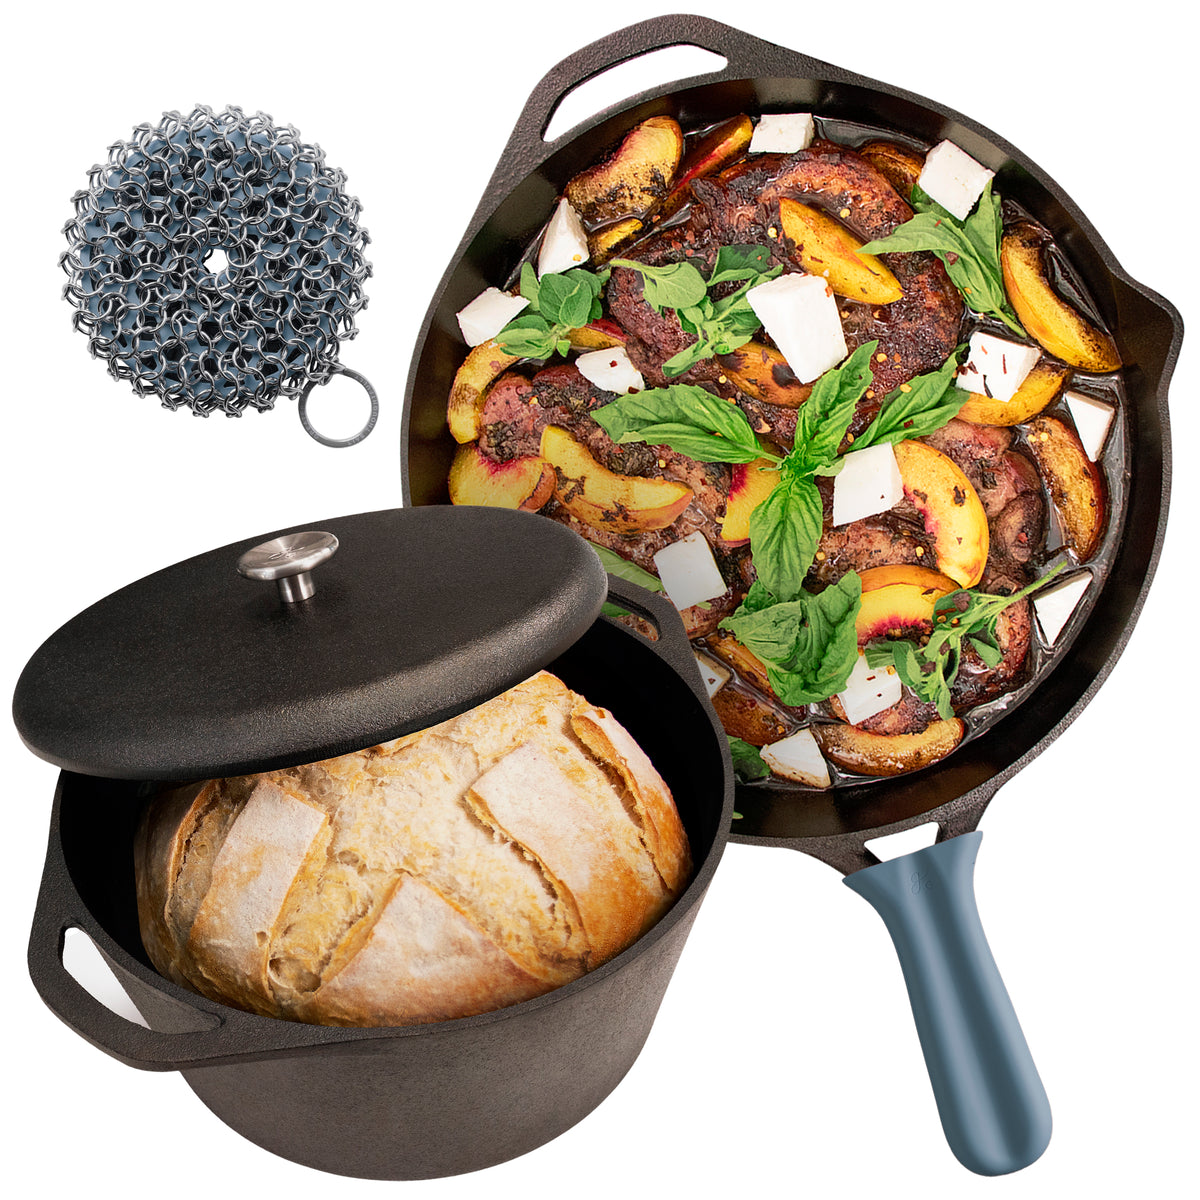 Greater Goods 12” Cast Iron Skillet and Cast Iron Dutch Oven Bundle with Silicone Handle and Chainmail Scrubber Bundle (Stone Blue)